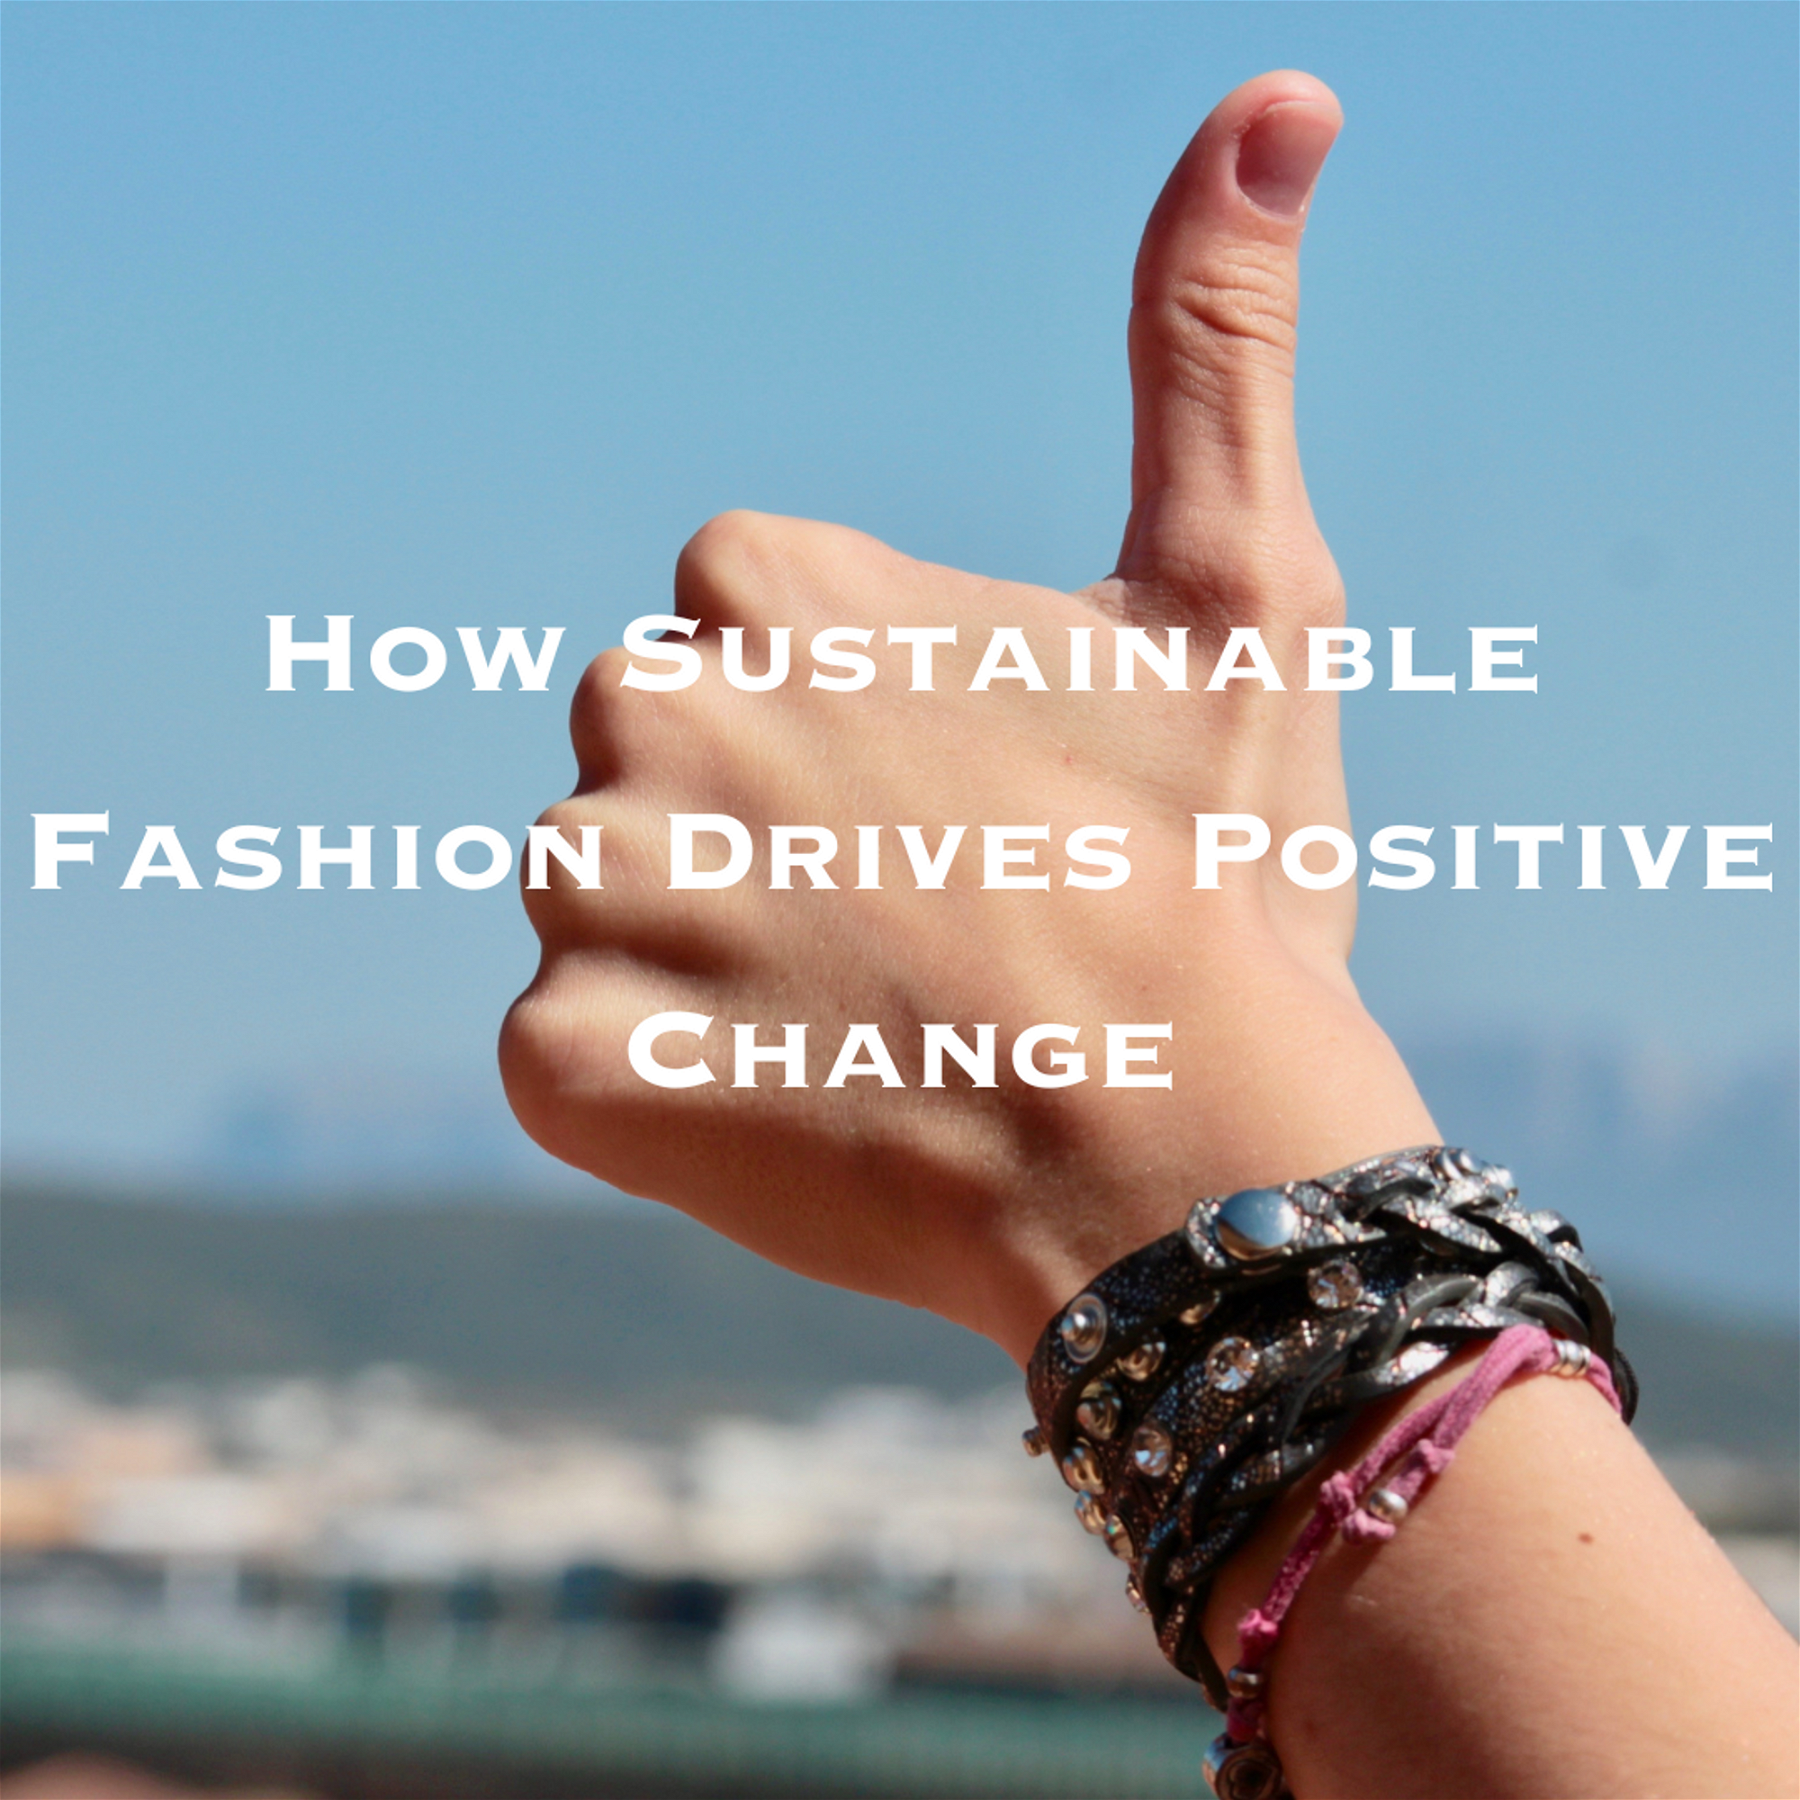 Building an Inclusive Industry: How Sustainable Fashion Drives Positive Change